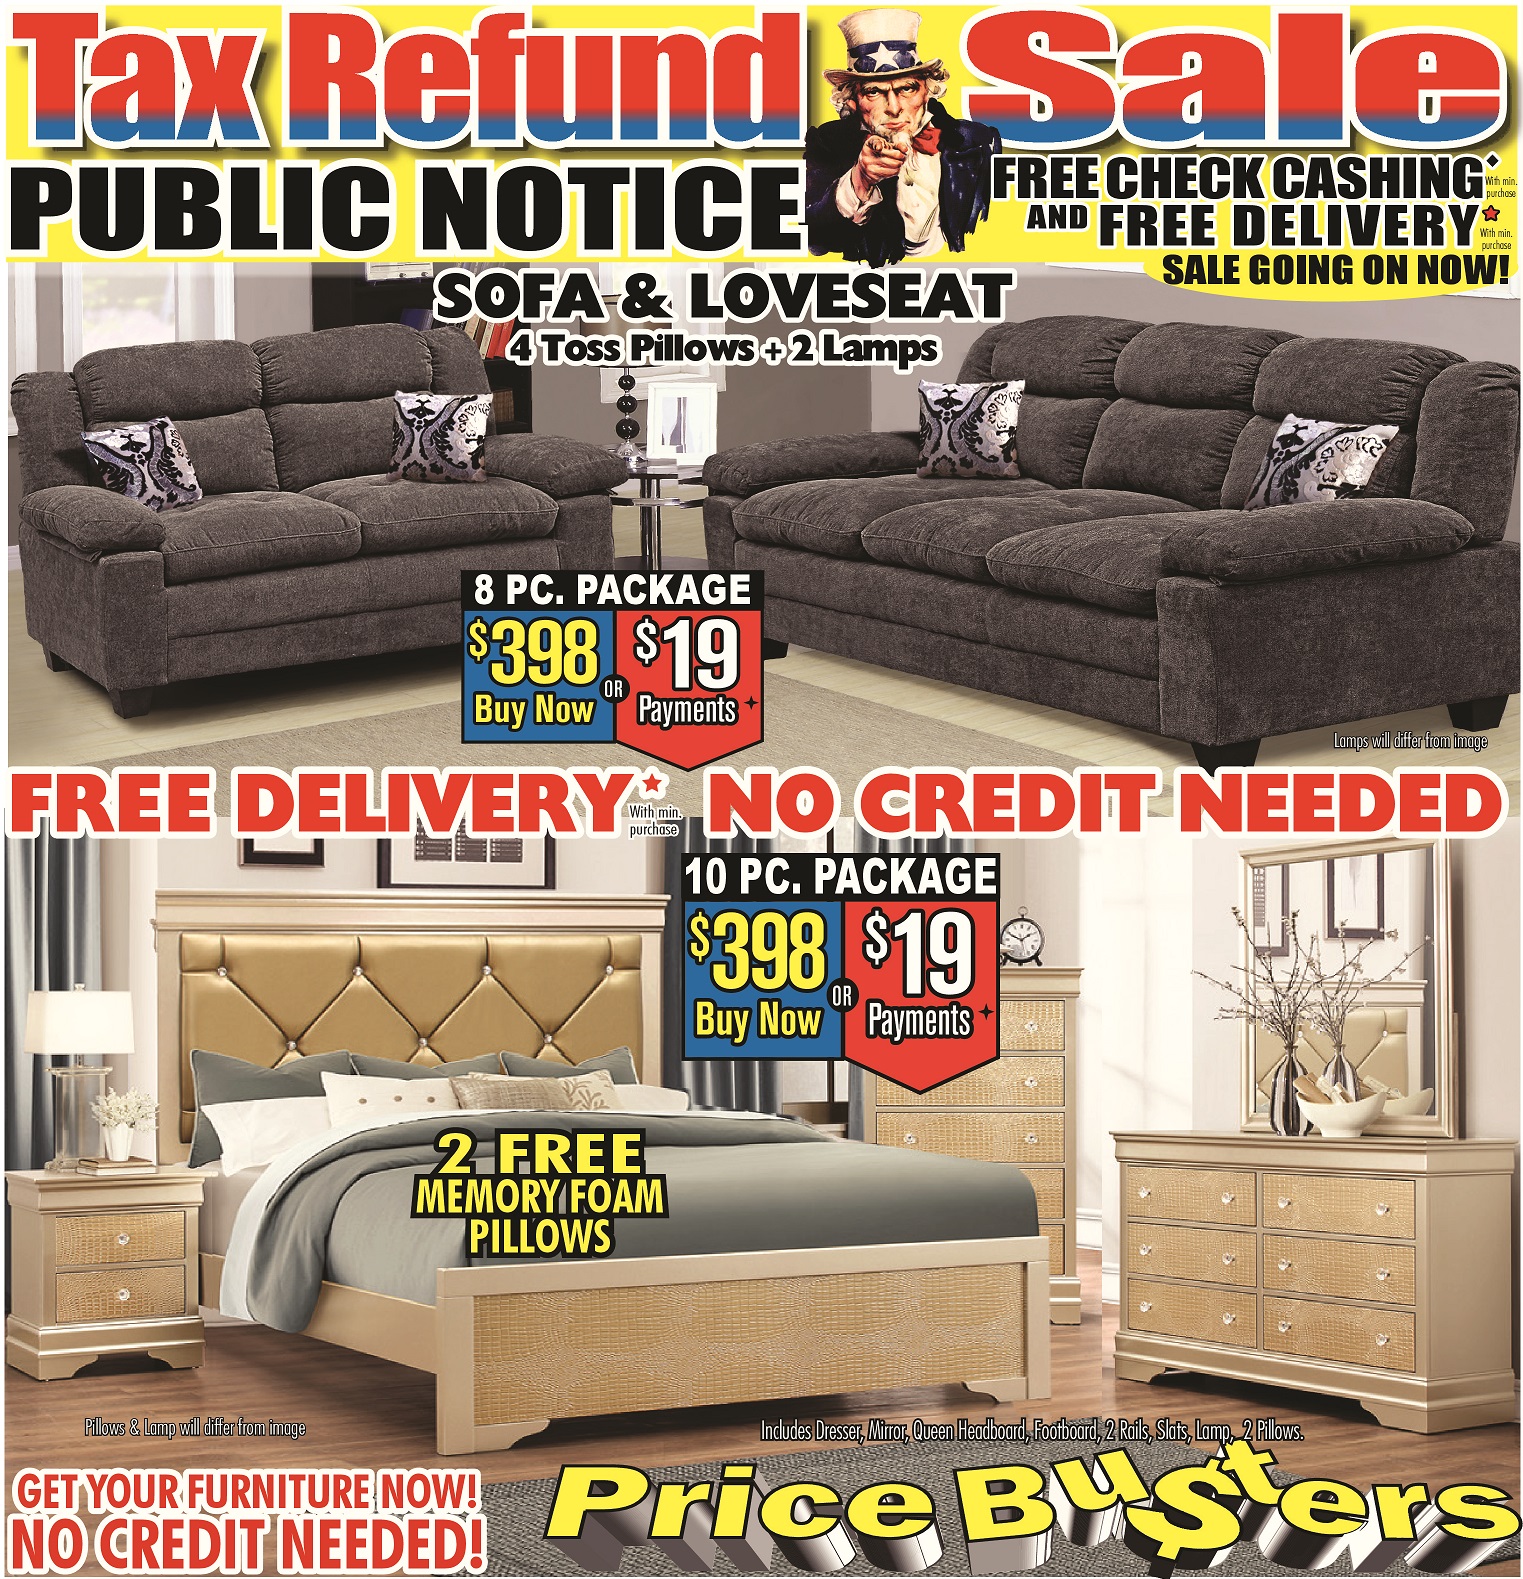 Price Busters Discount Furniture 7870 Central Avenue Hyattsville